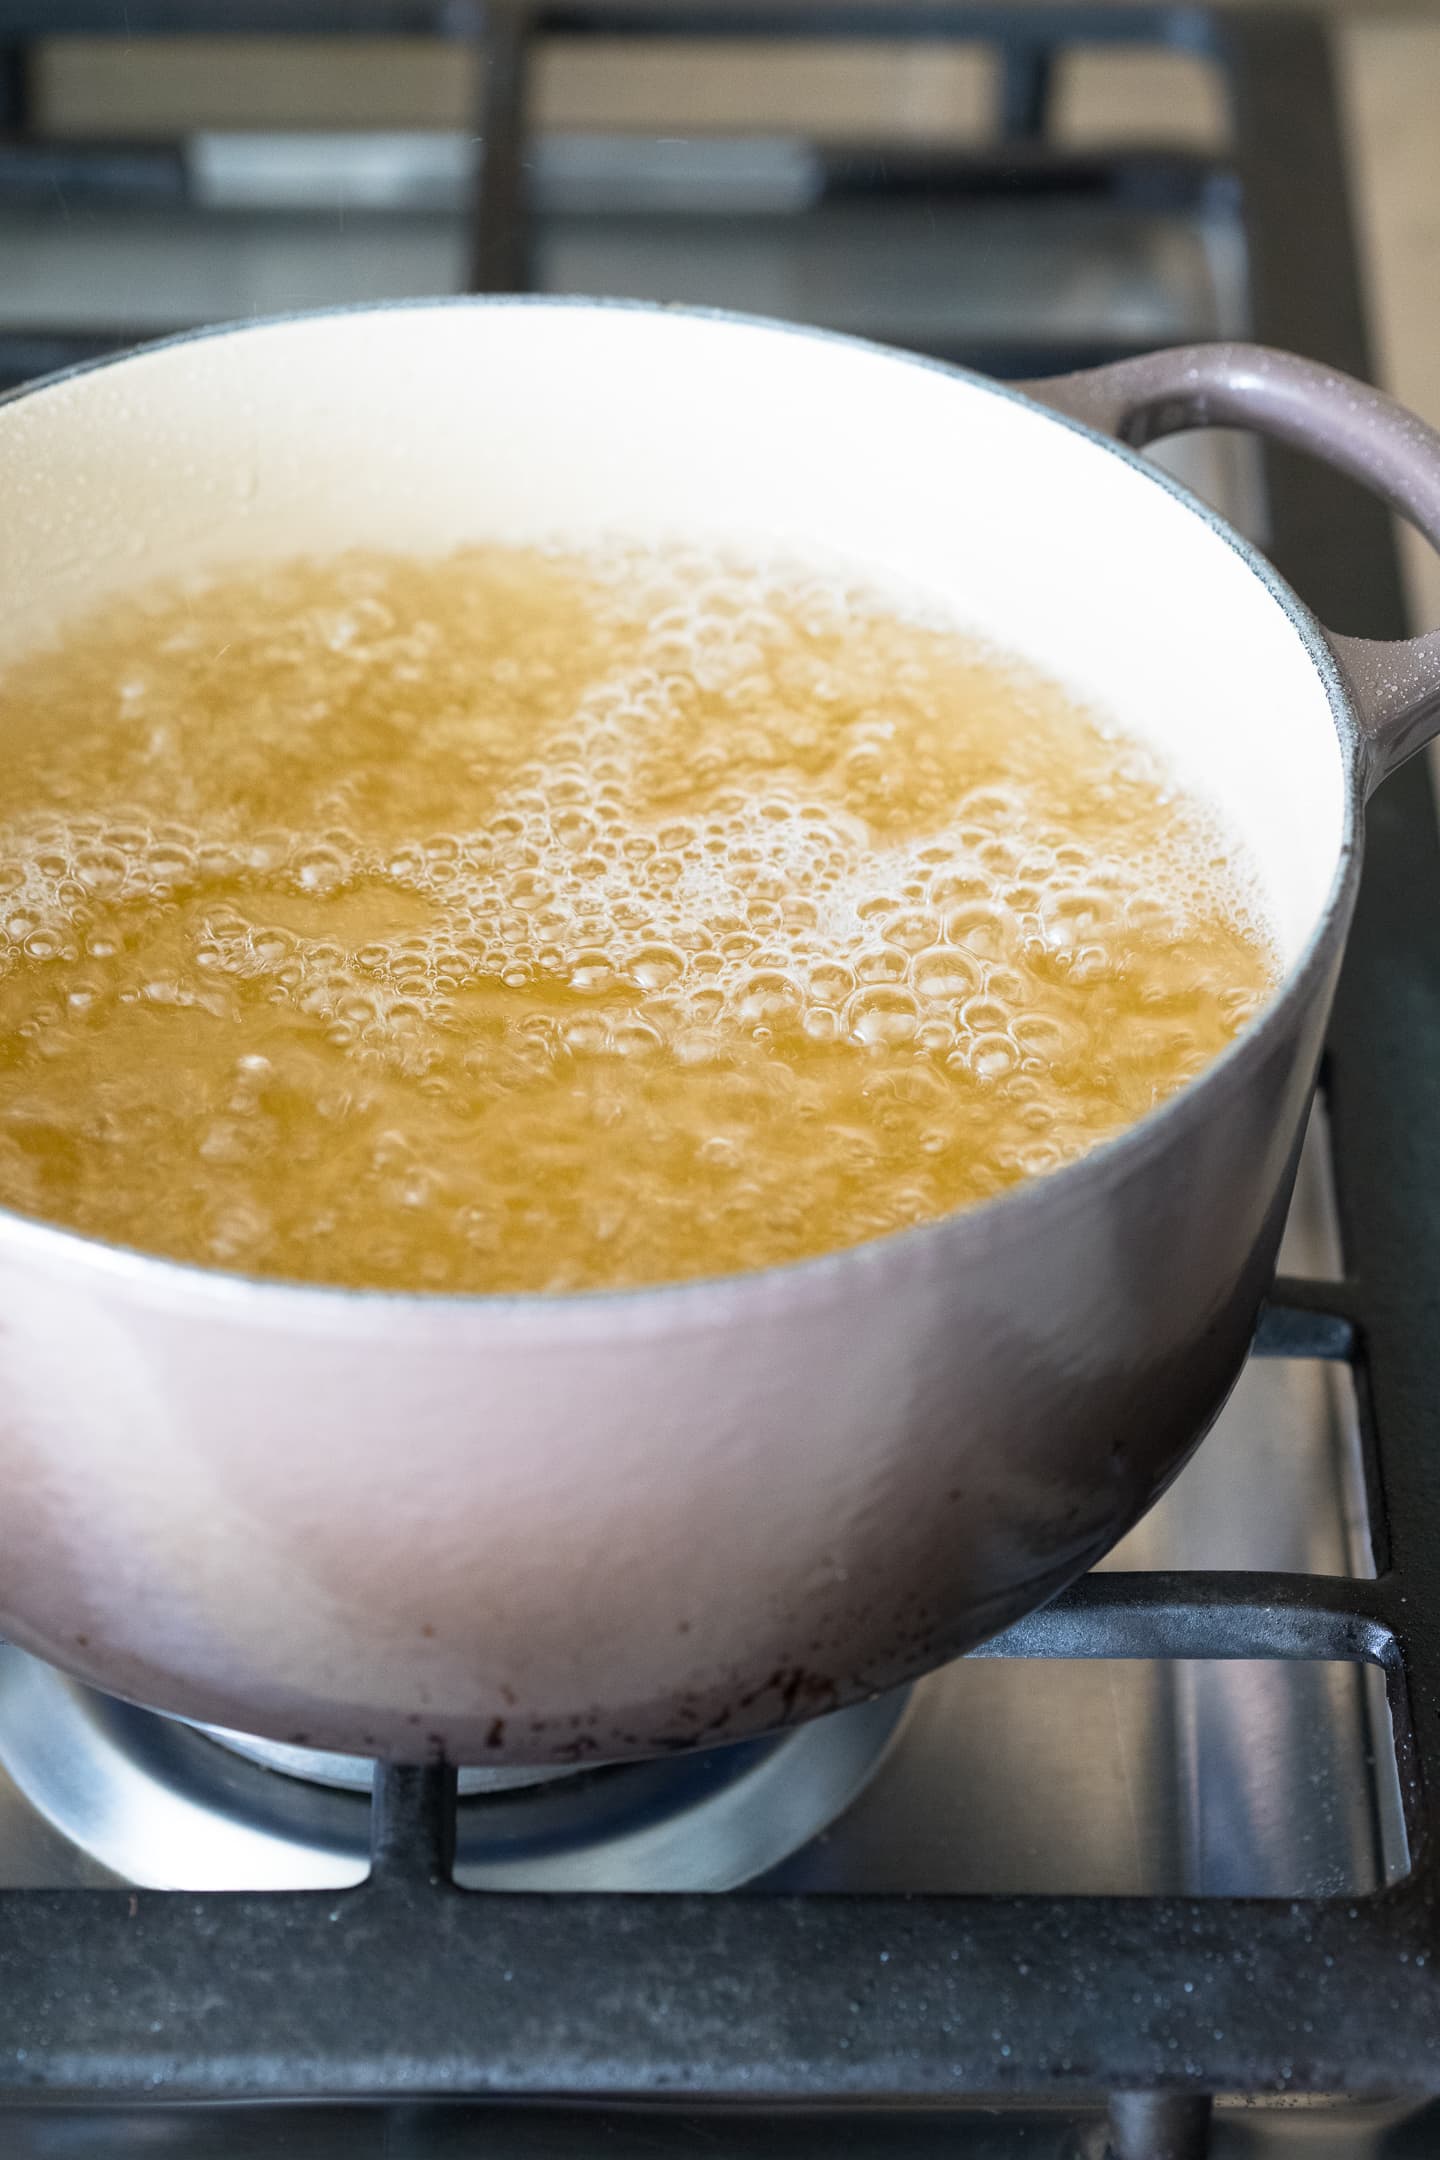 Angled view of sugar syrup simmering in a pot on the stove.